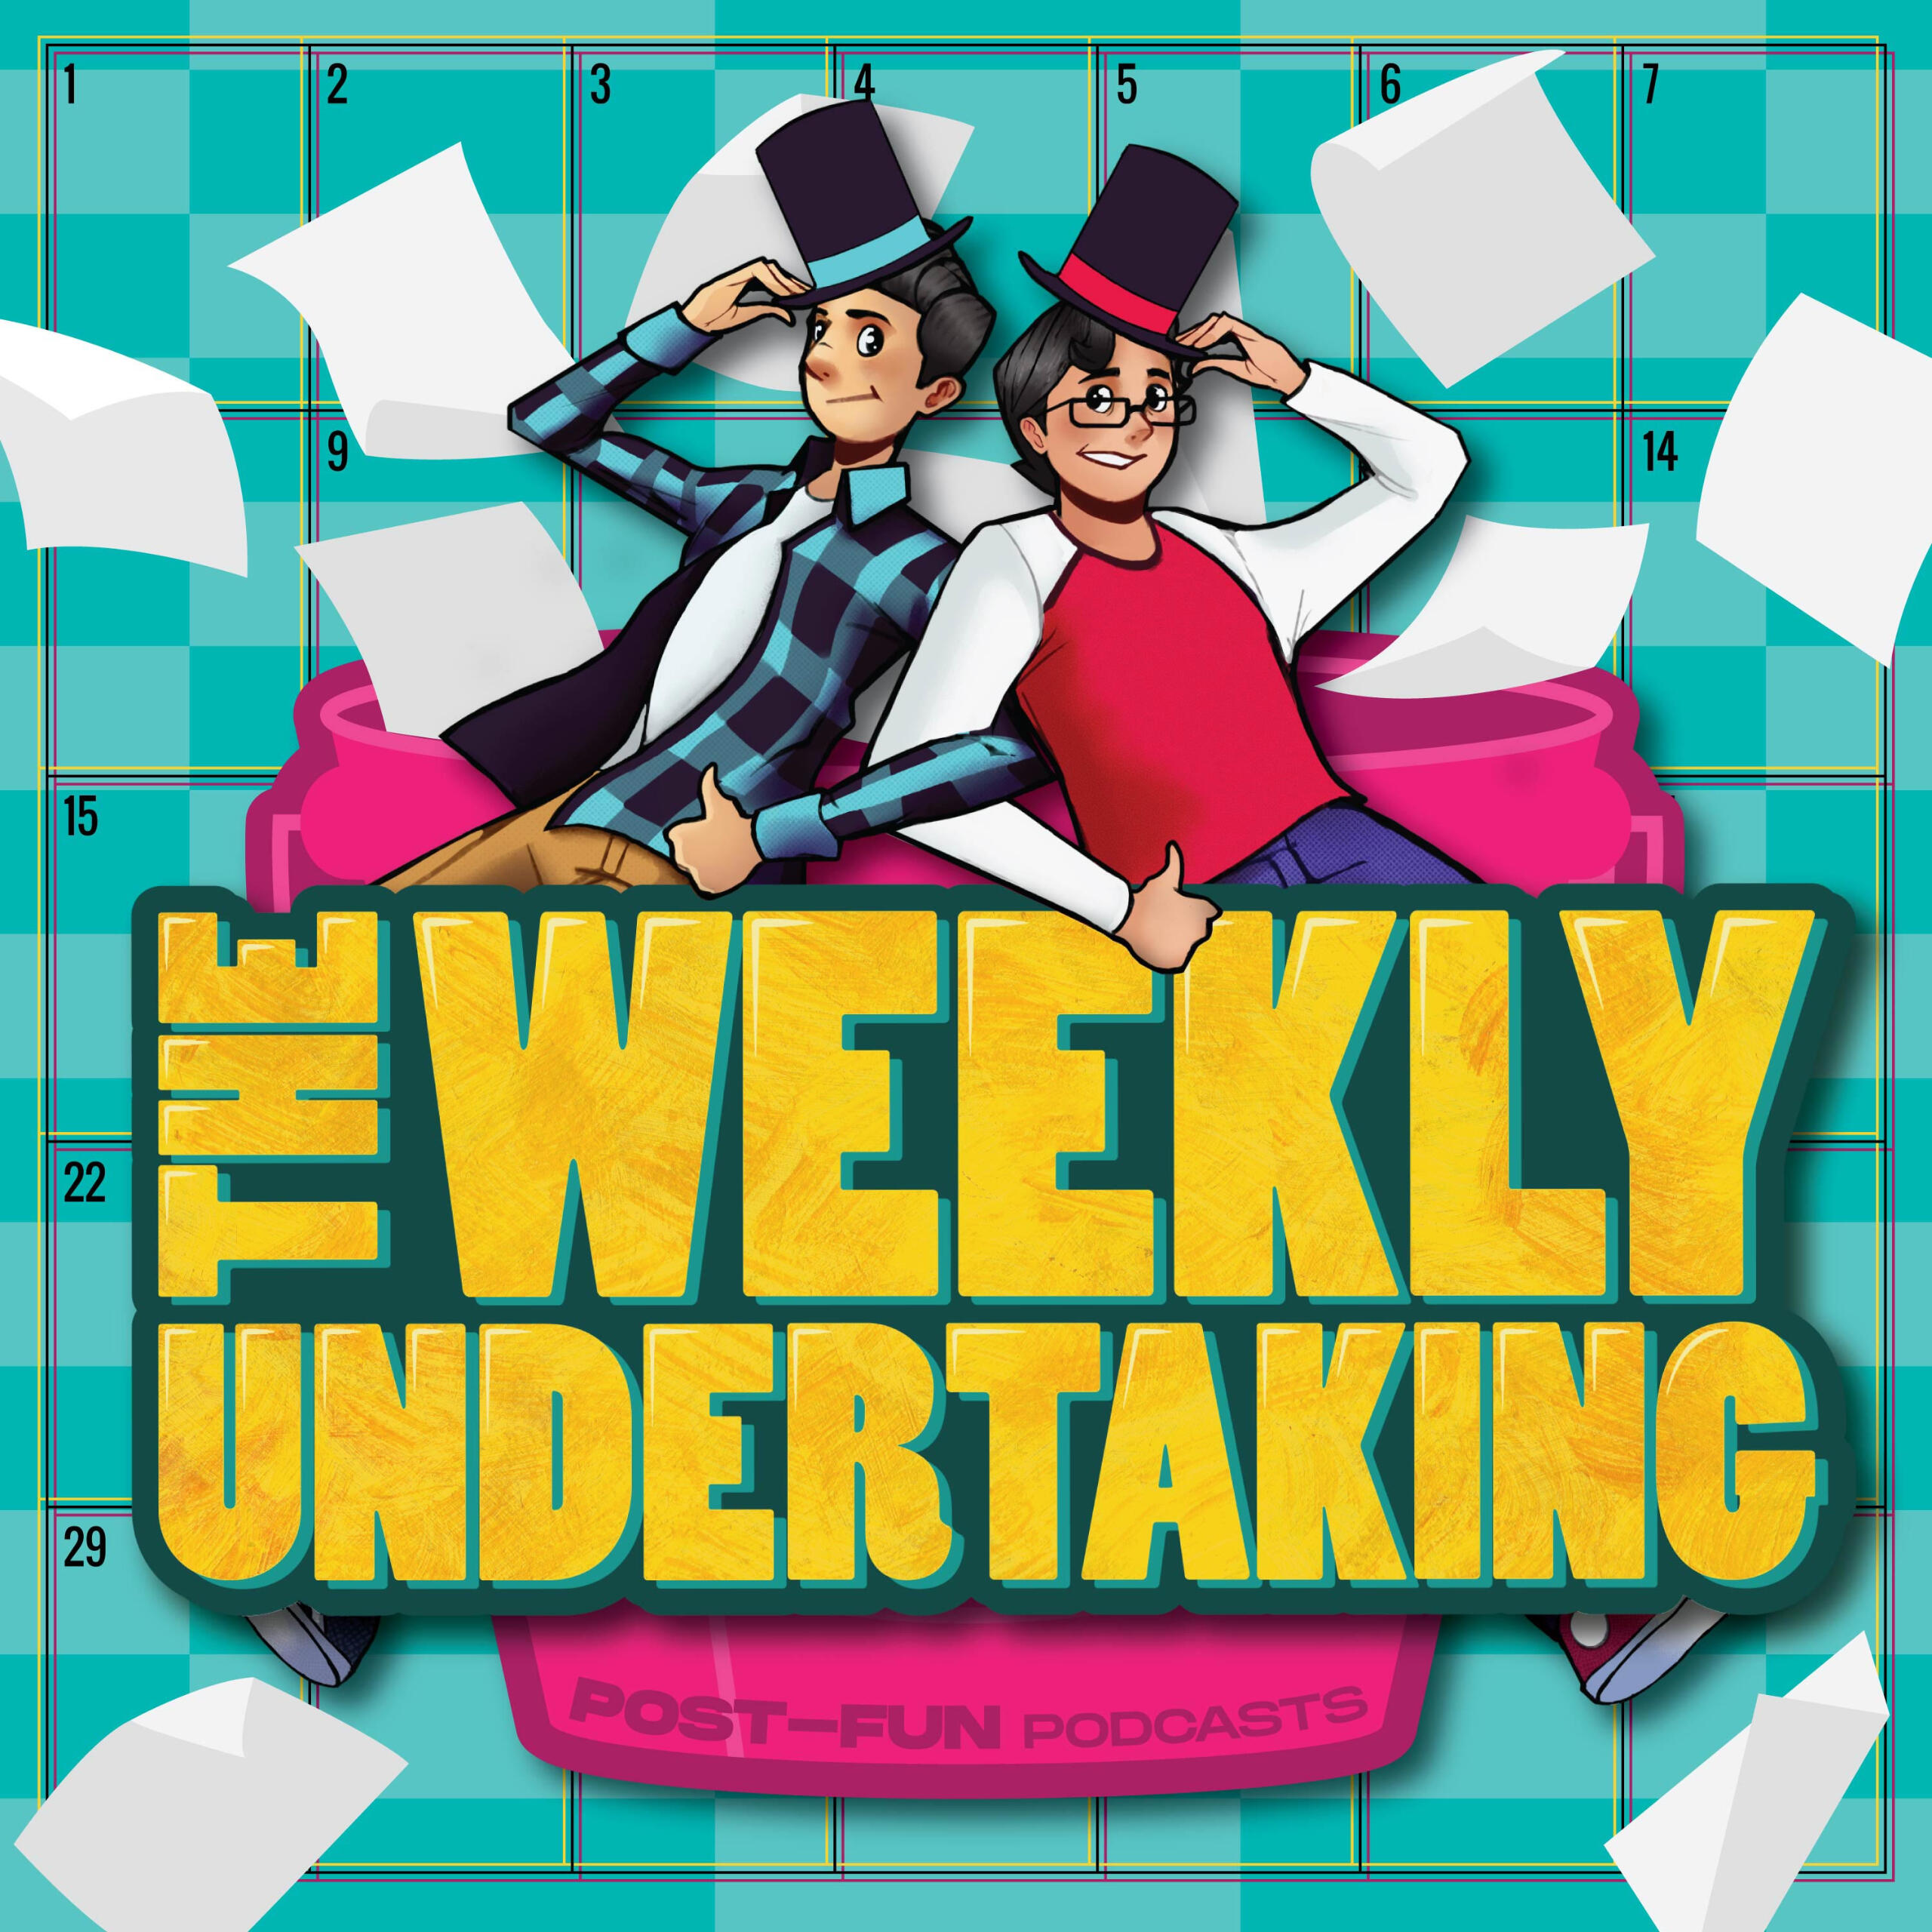 Post-Fun Podcasts | The Weekly Undertaking, a pop-culture and conversation podcast